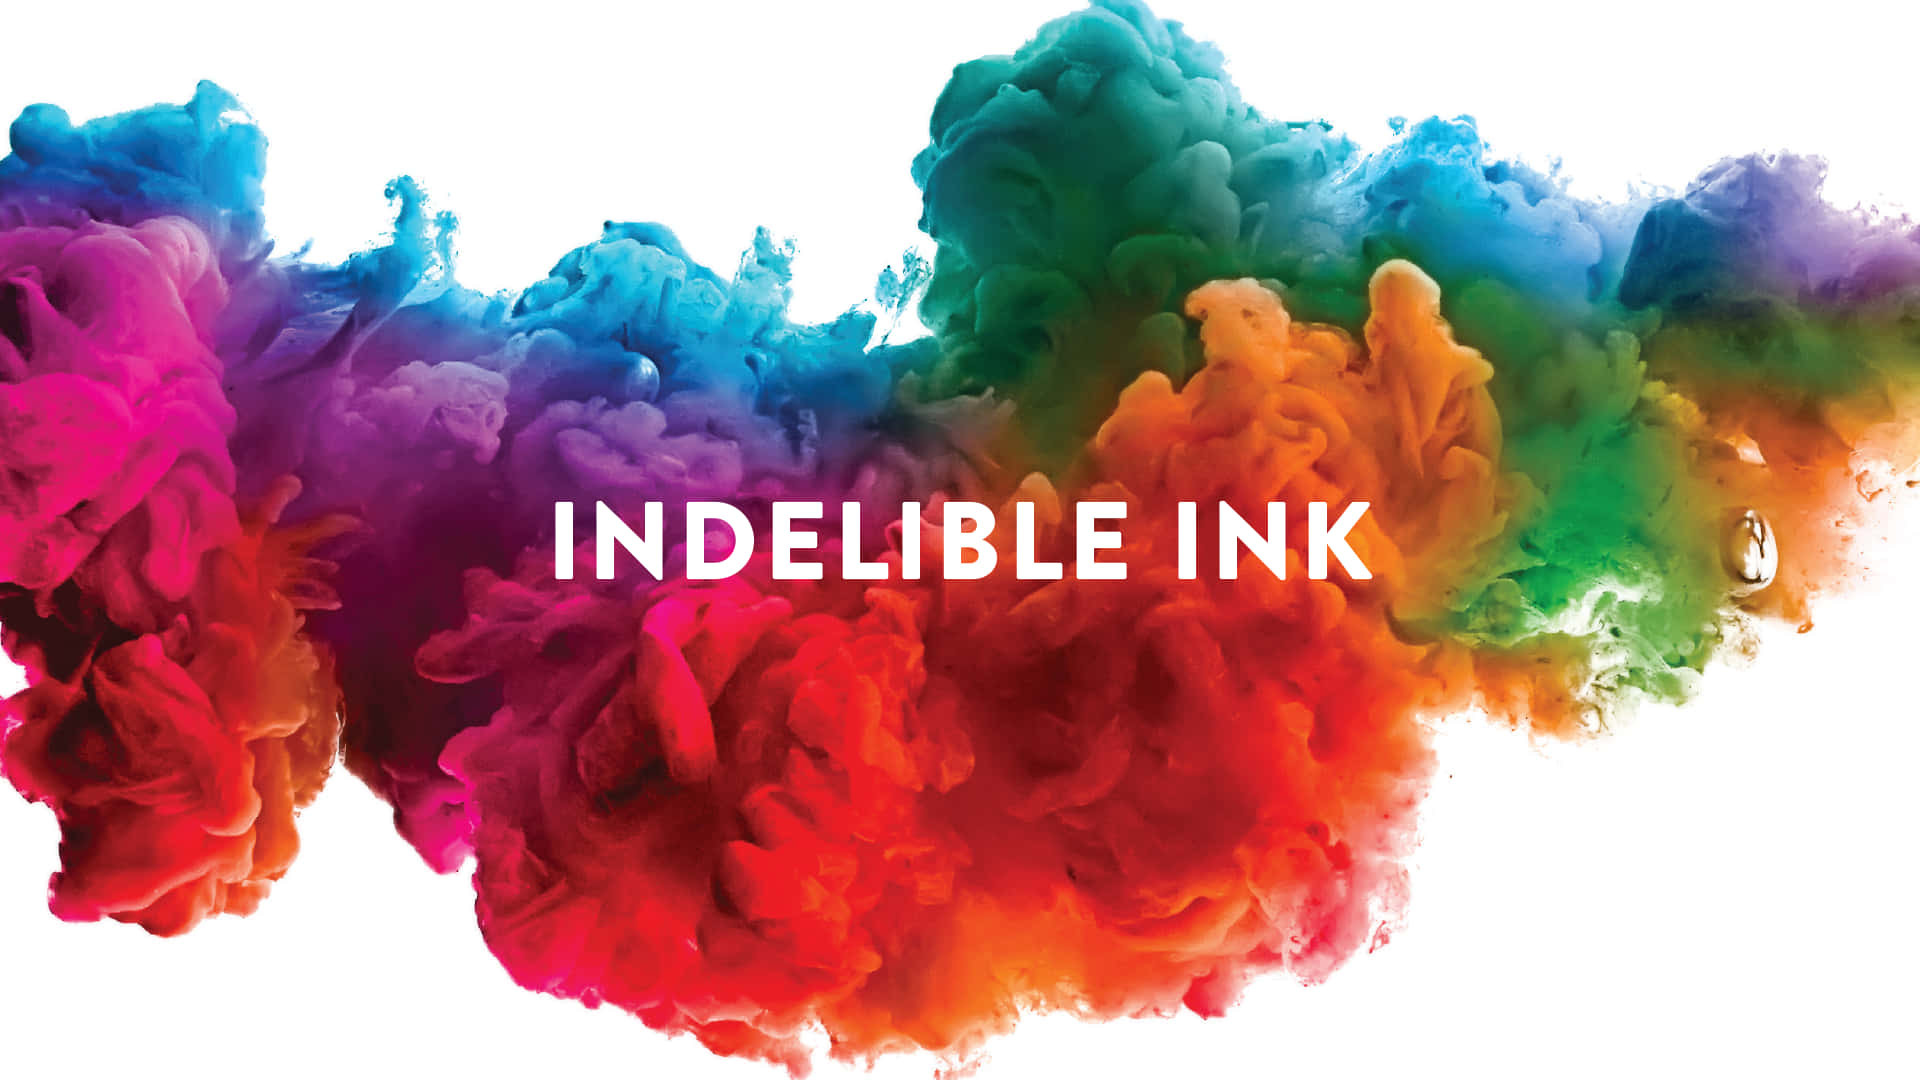 Indelible Ink Dissolved In Water Wallpaper